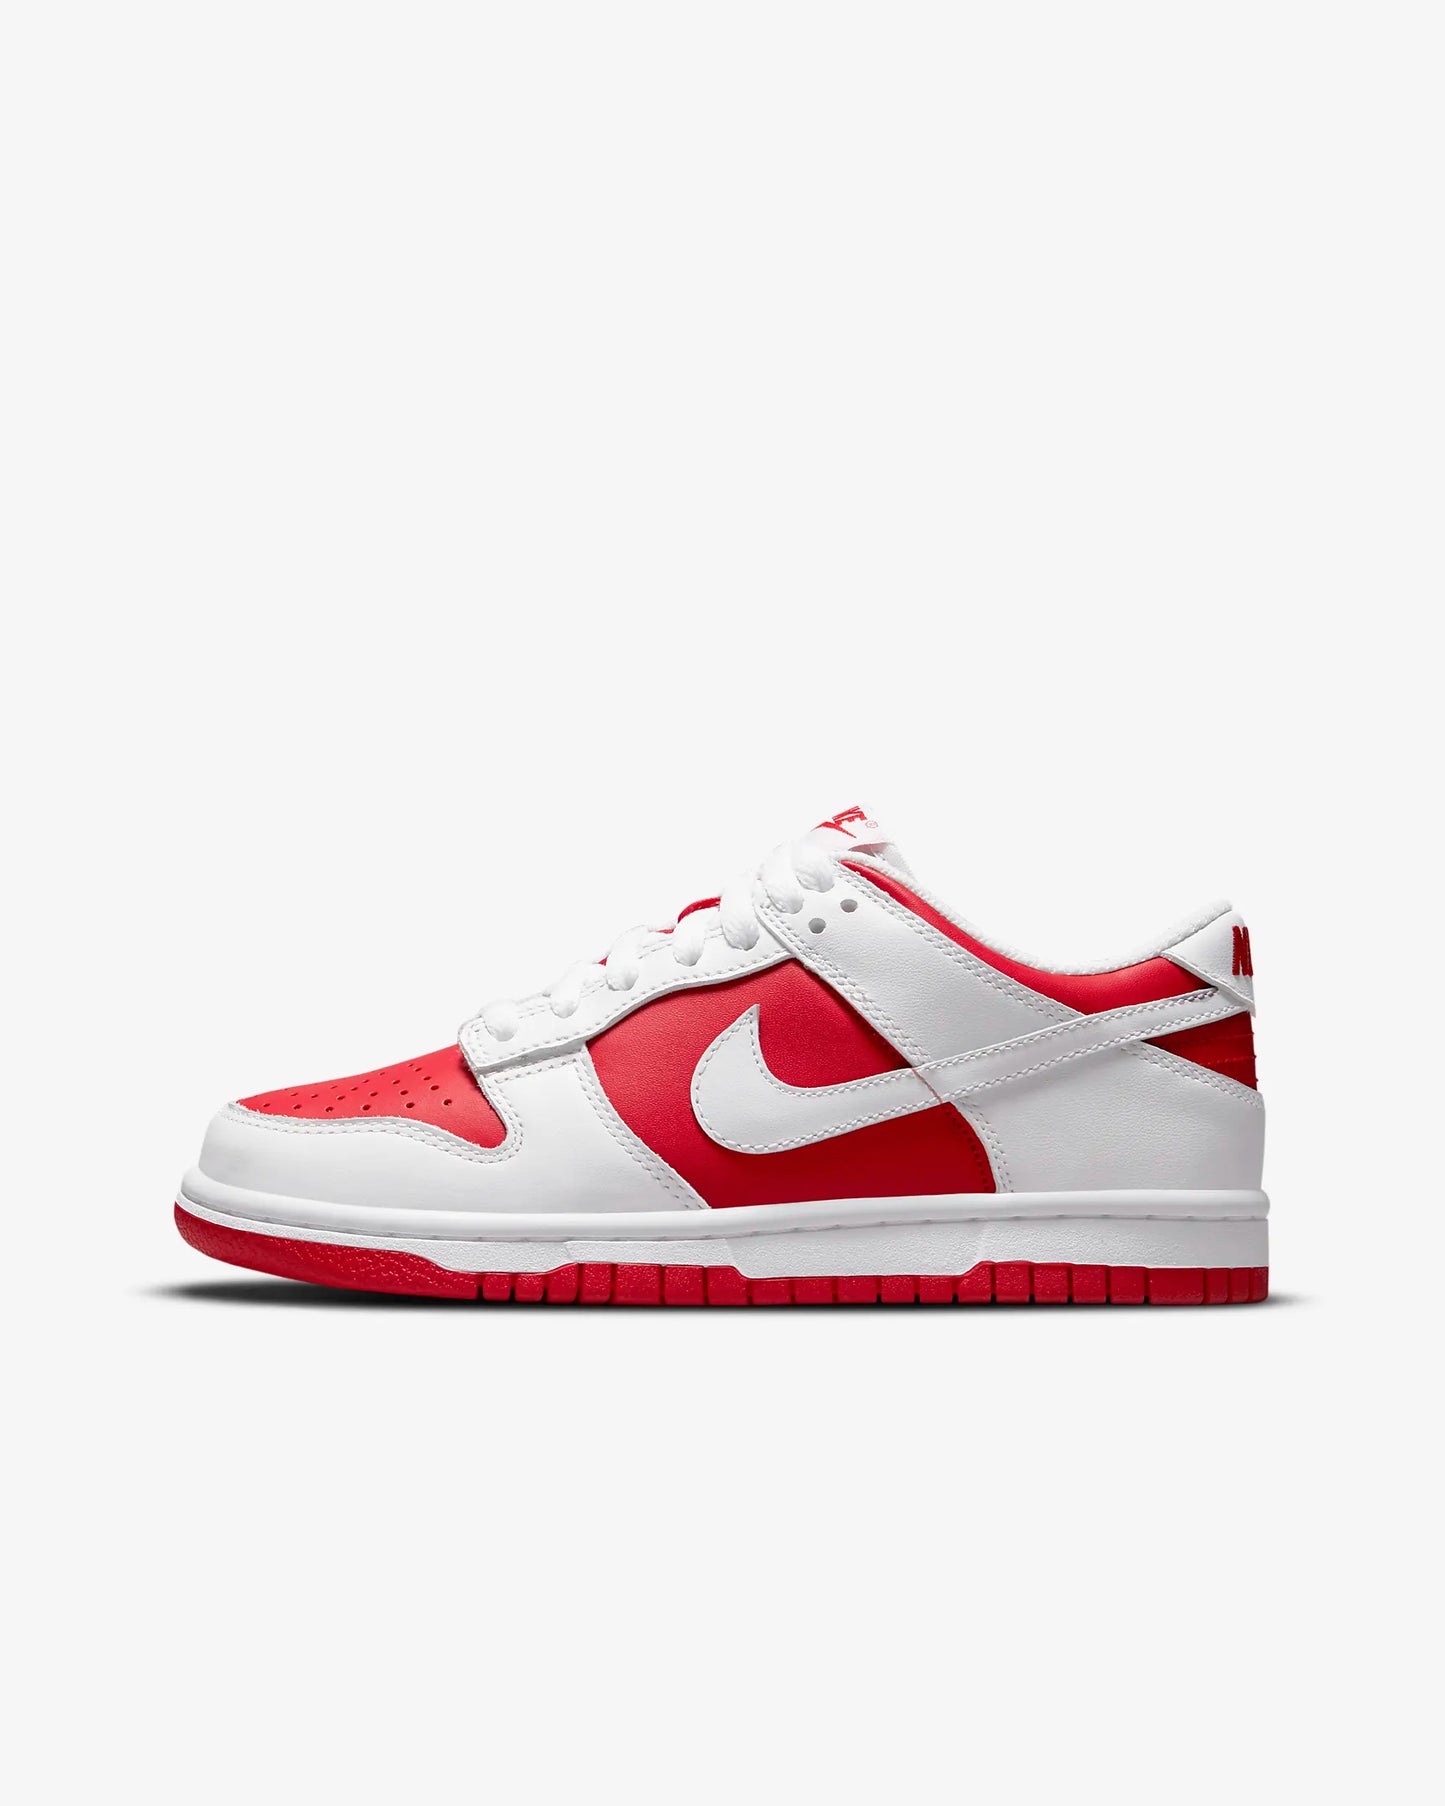 Nike Dunk Low Championship Red - cw1590 600